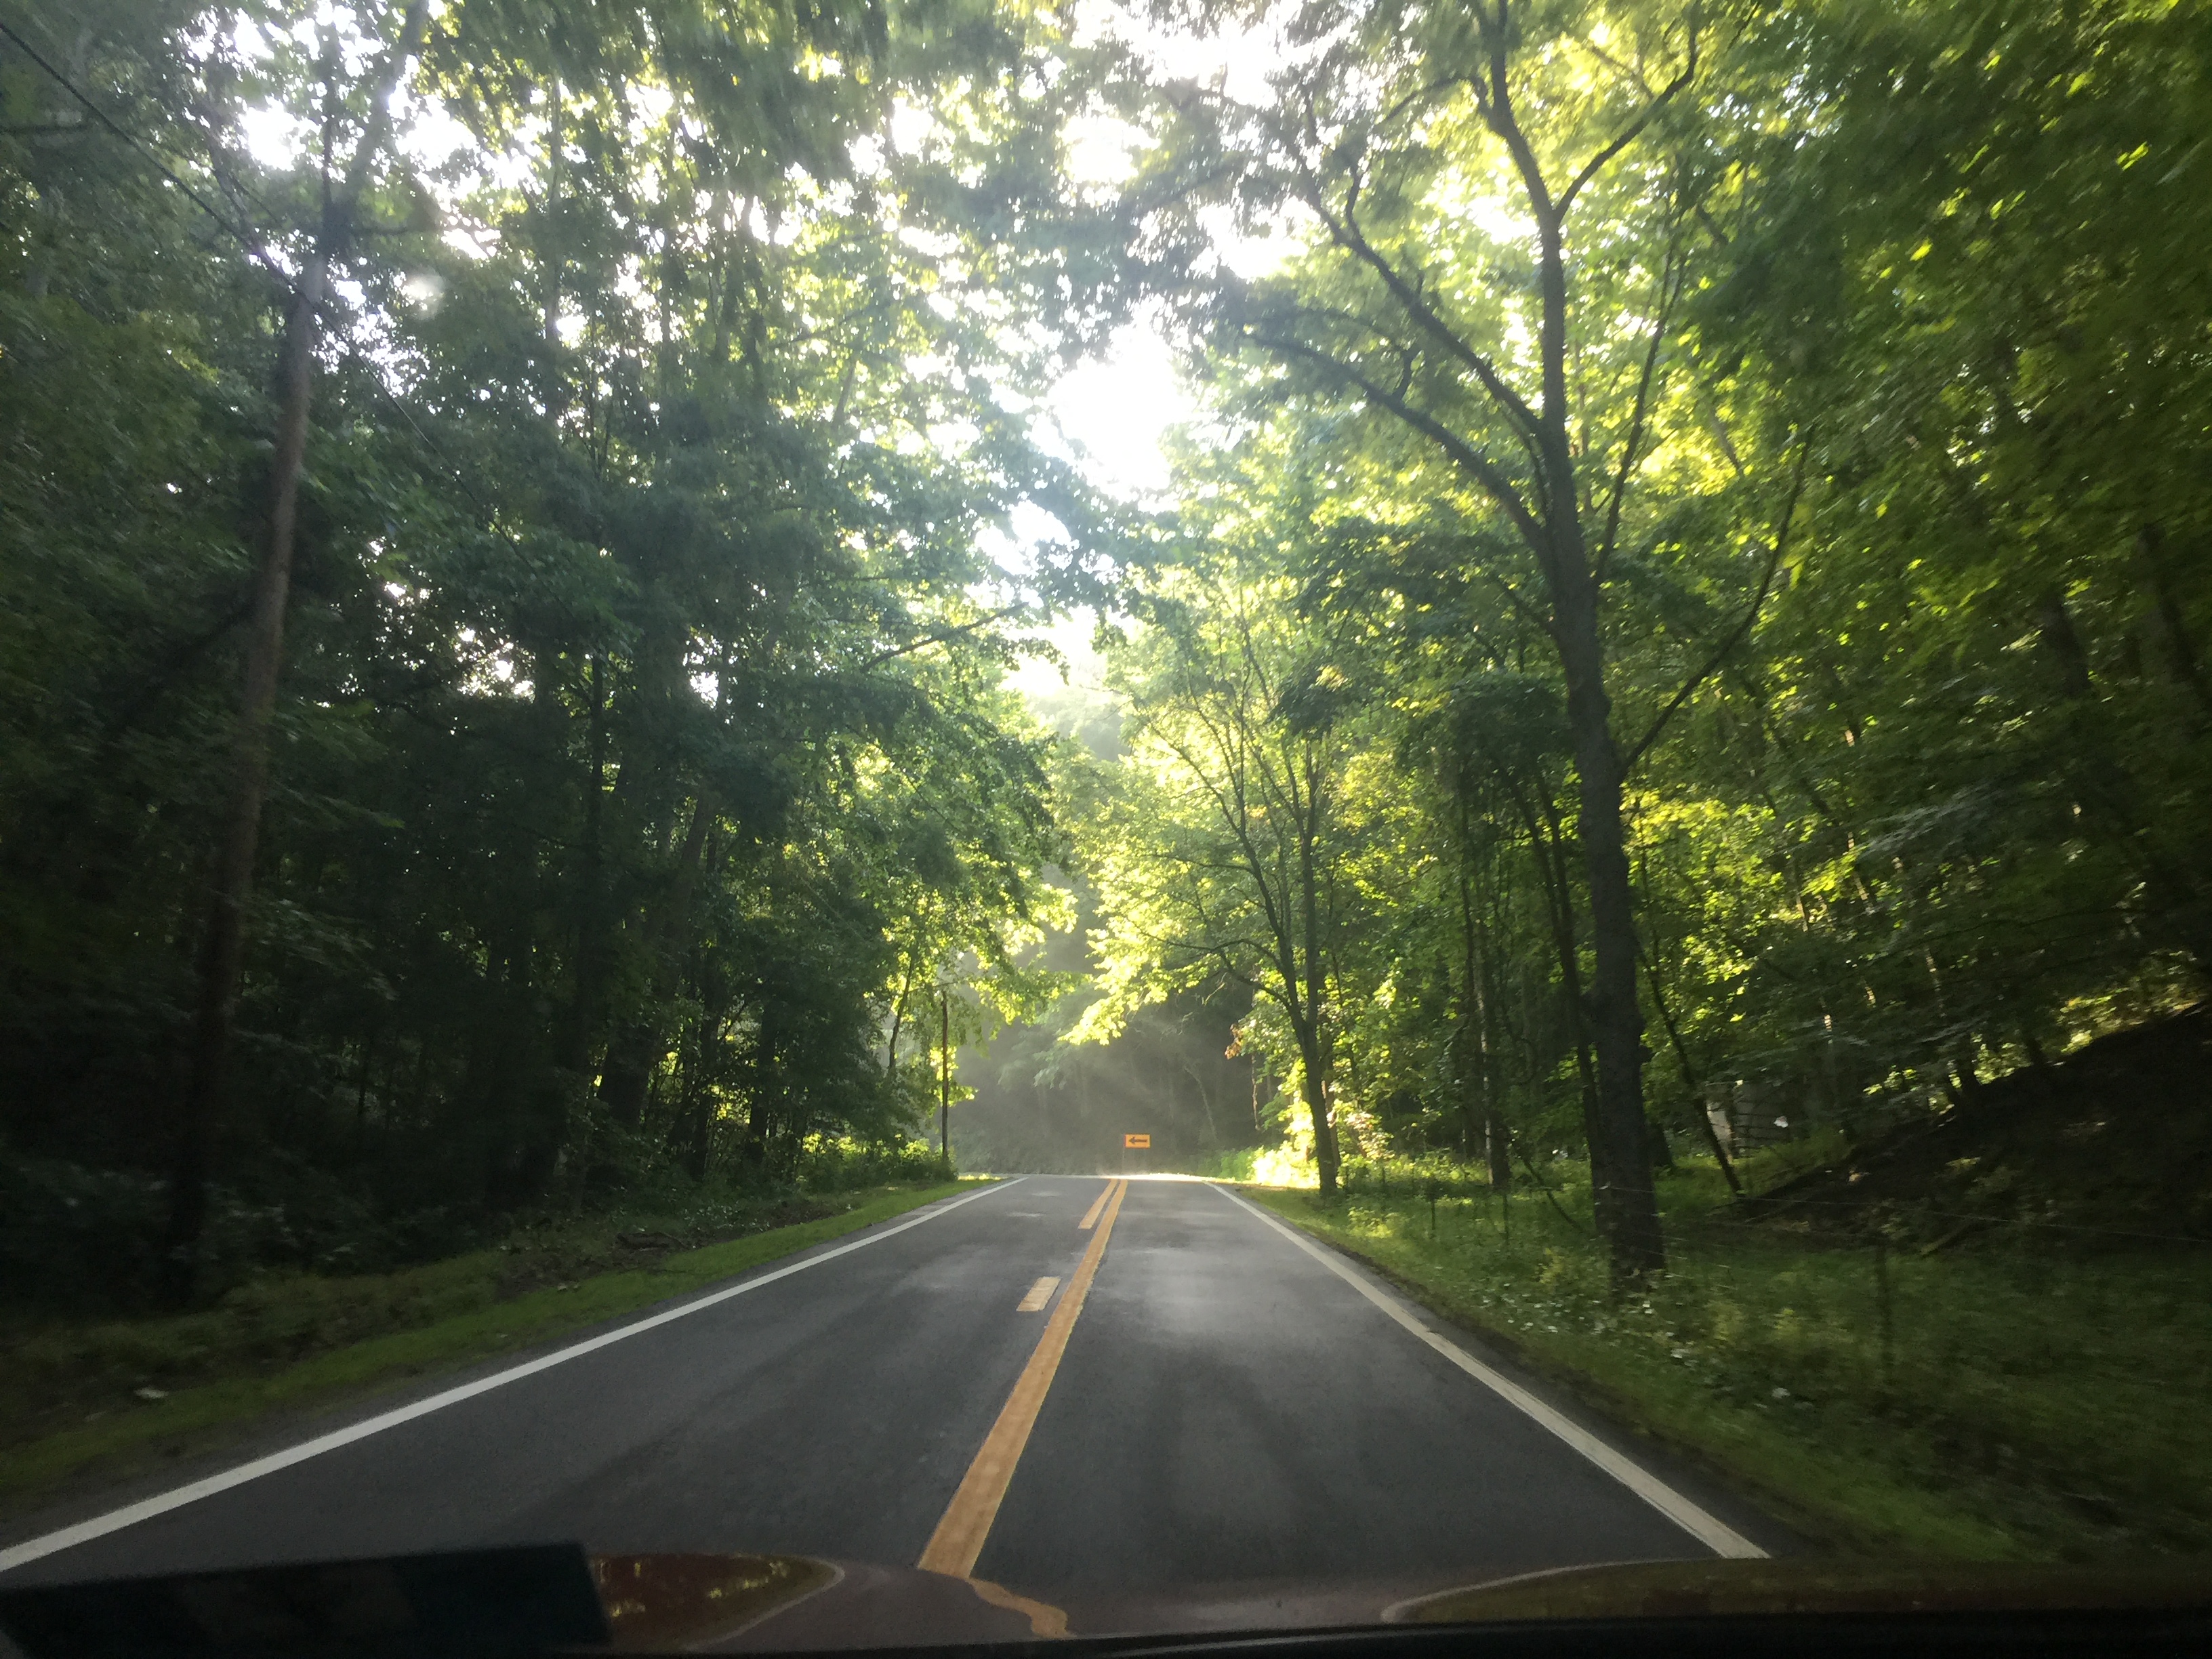 driving on a road in the forest